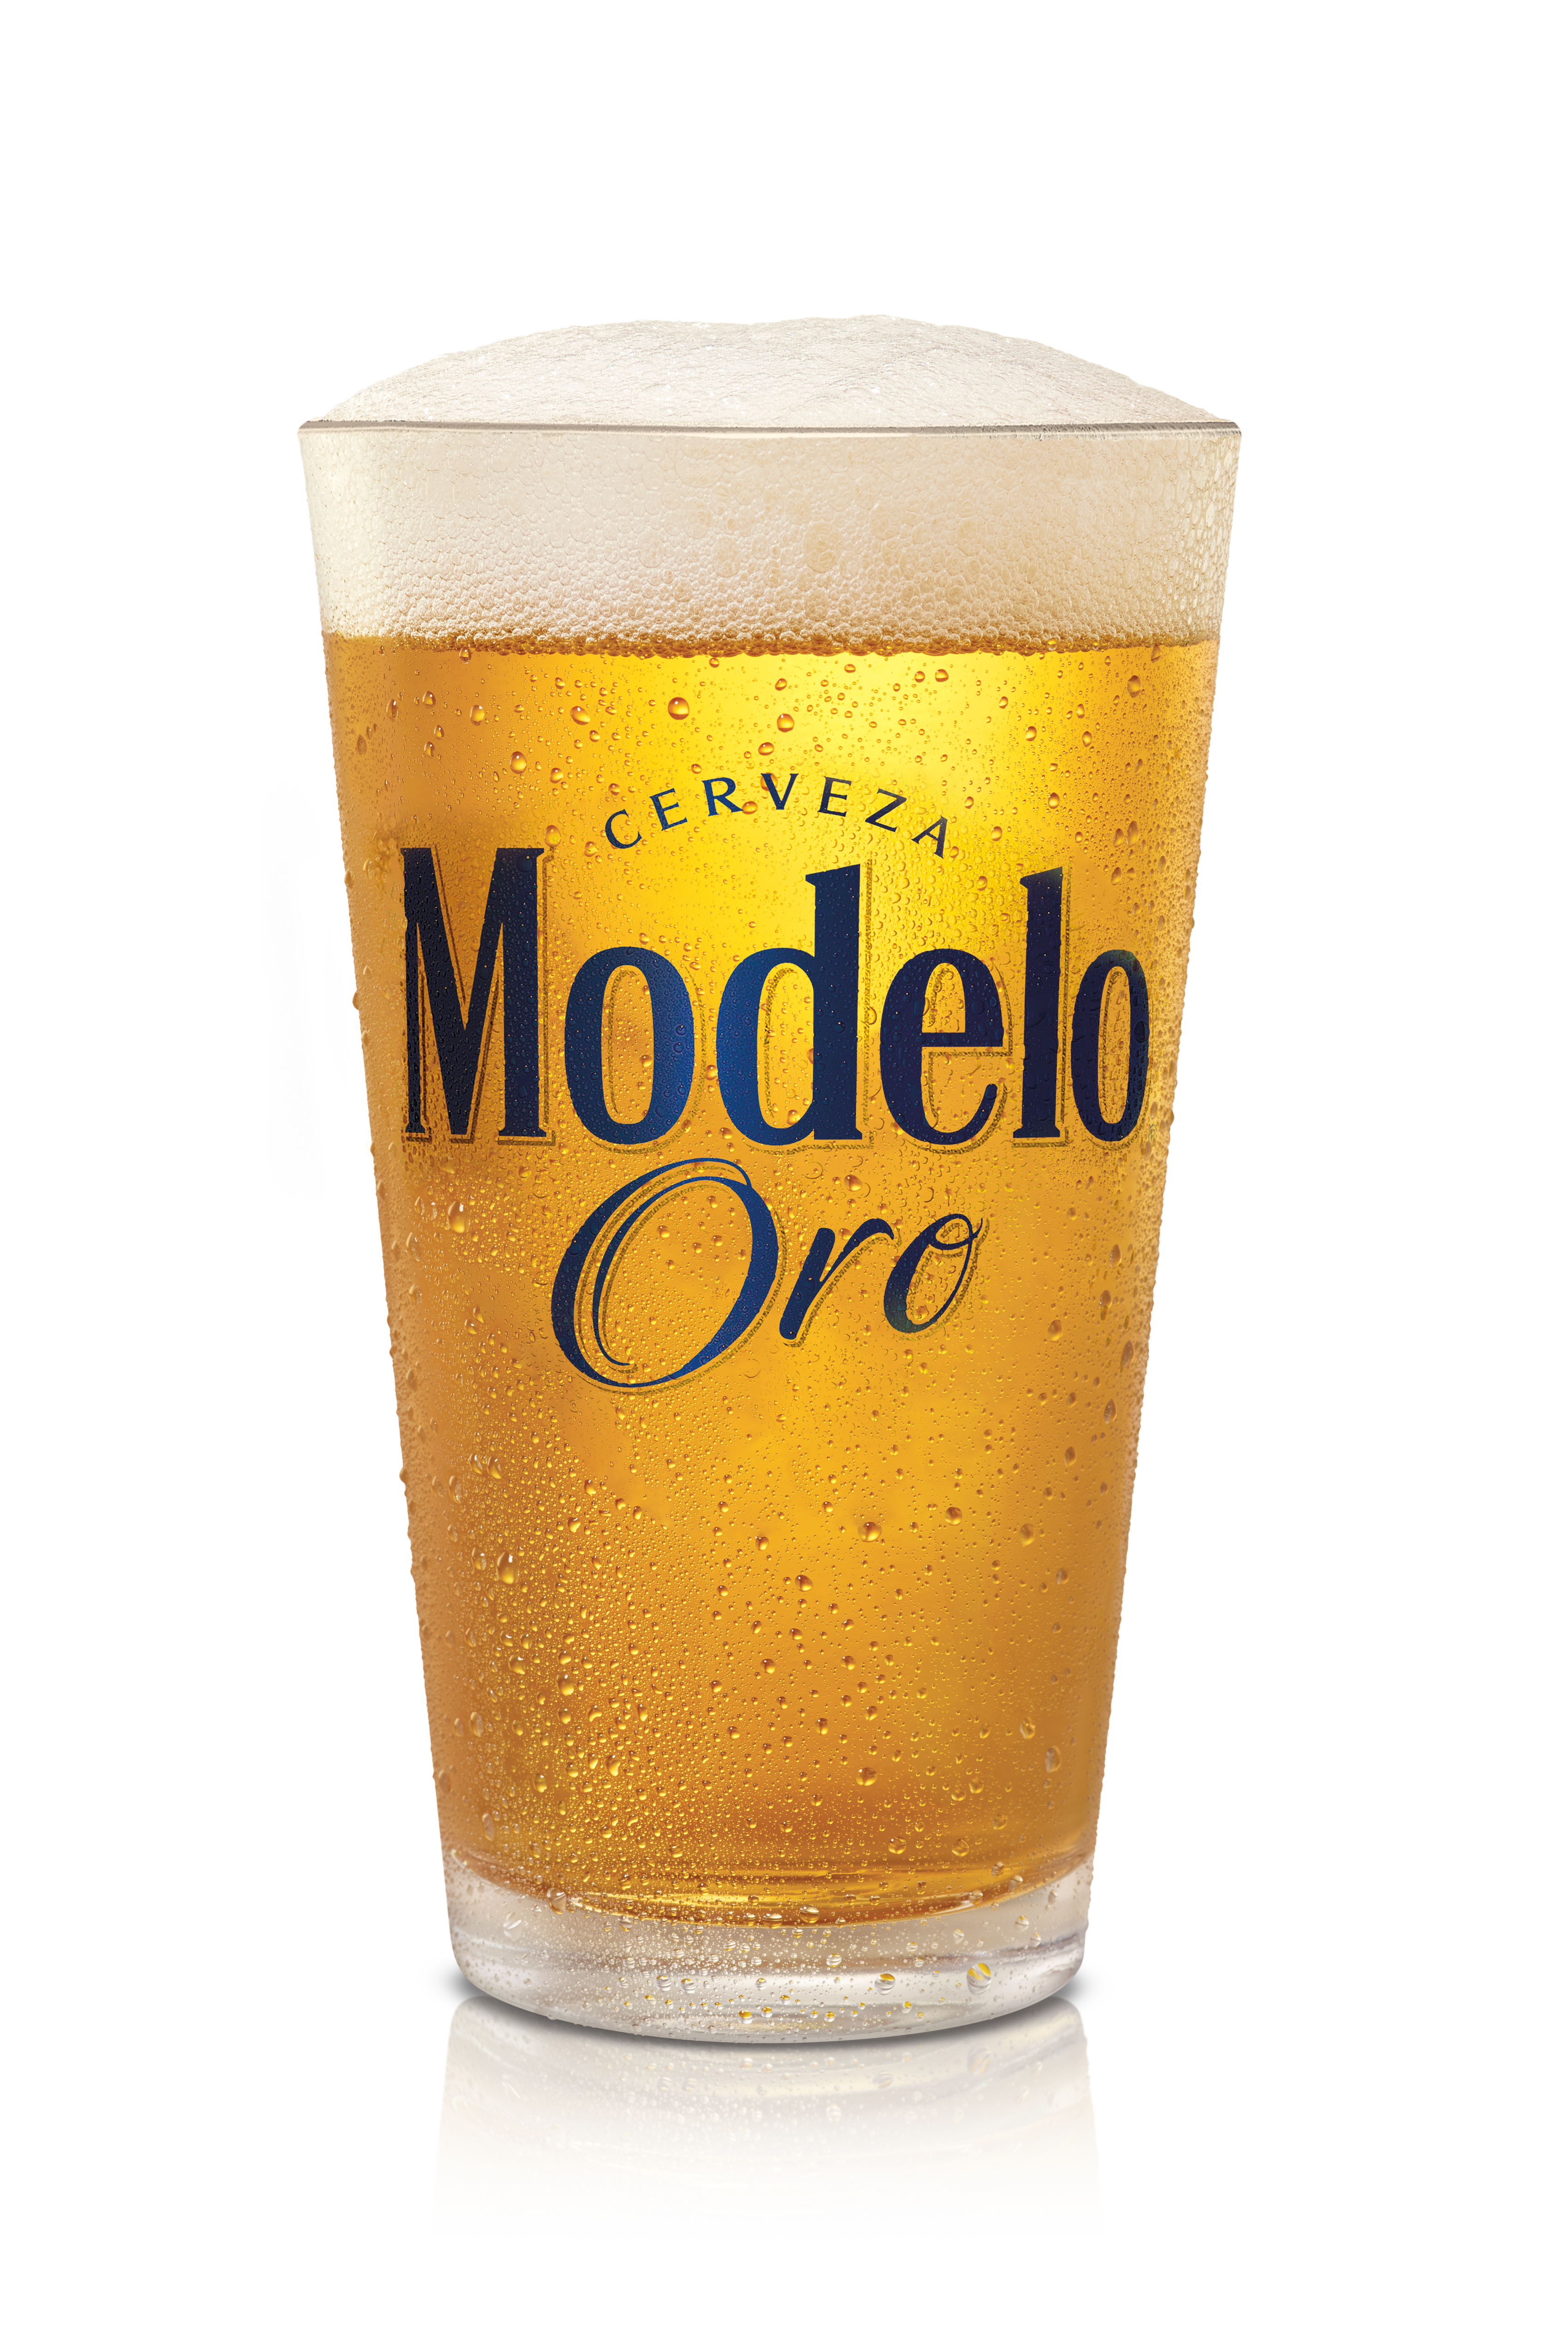 Modelo Oro Mexican Lager Light Import Beer, 12 Pack, 12 fl oz Aluminum  Cans, 4% ABV